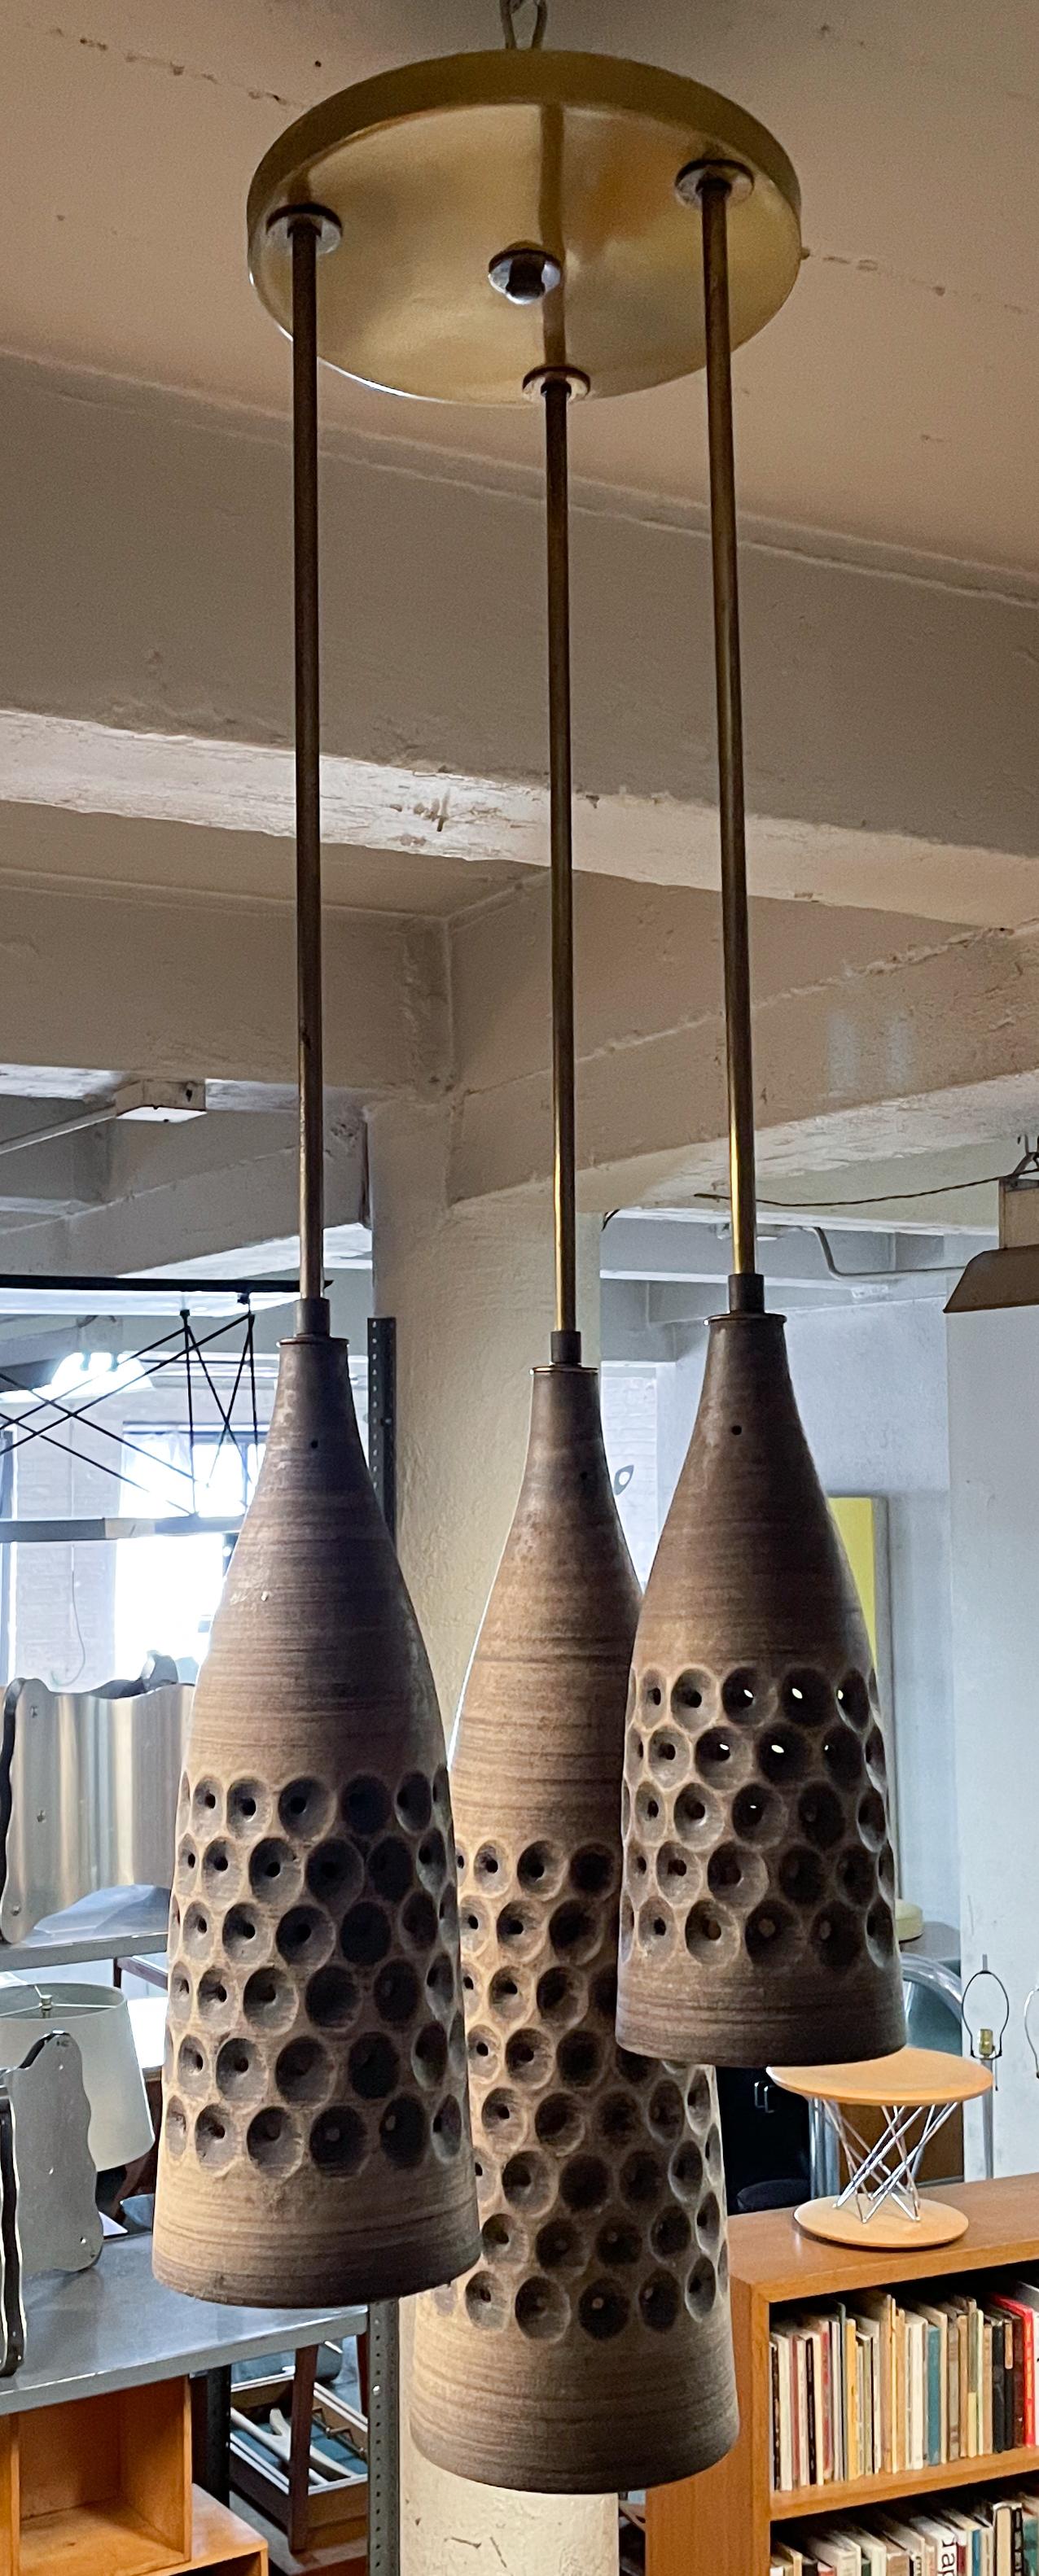 Hanging fixture in a spiral composition composed of three pierced ceramic forms of decreasing size connected by brass rods and fittings to a brass ceiling plate. Designed by Lee Rosen and made by her company Design Technics in the 1950's or early